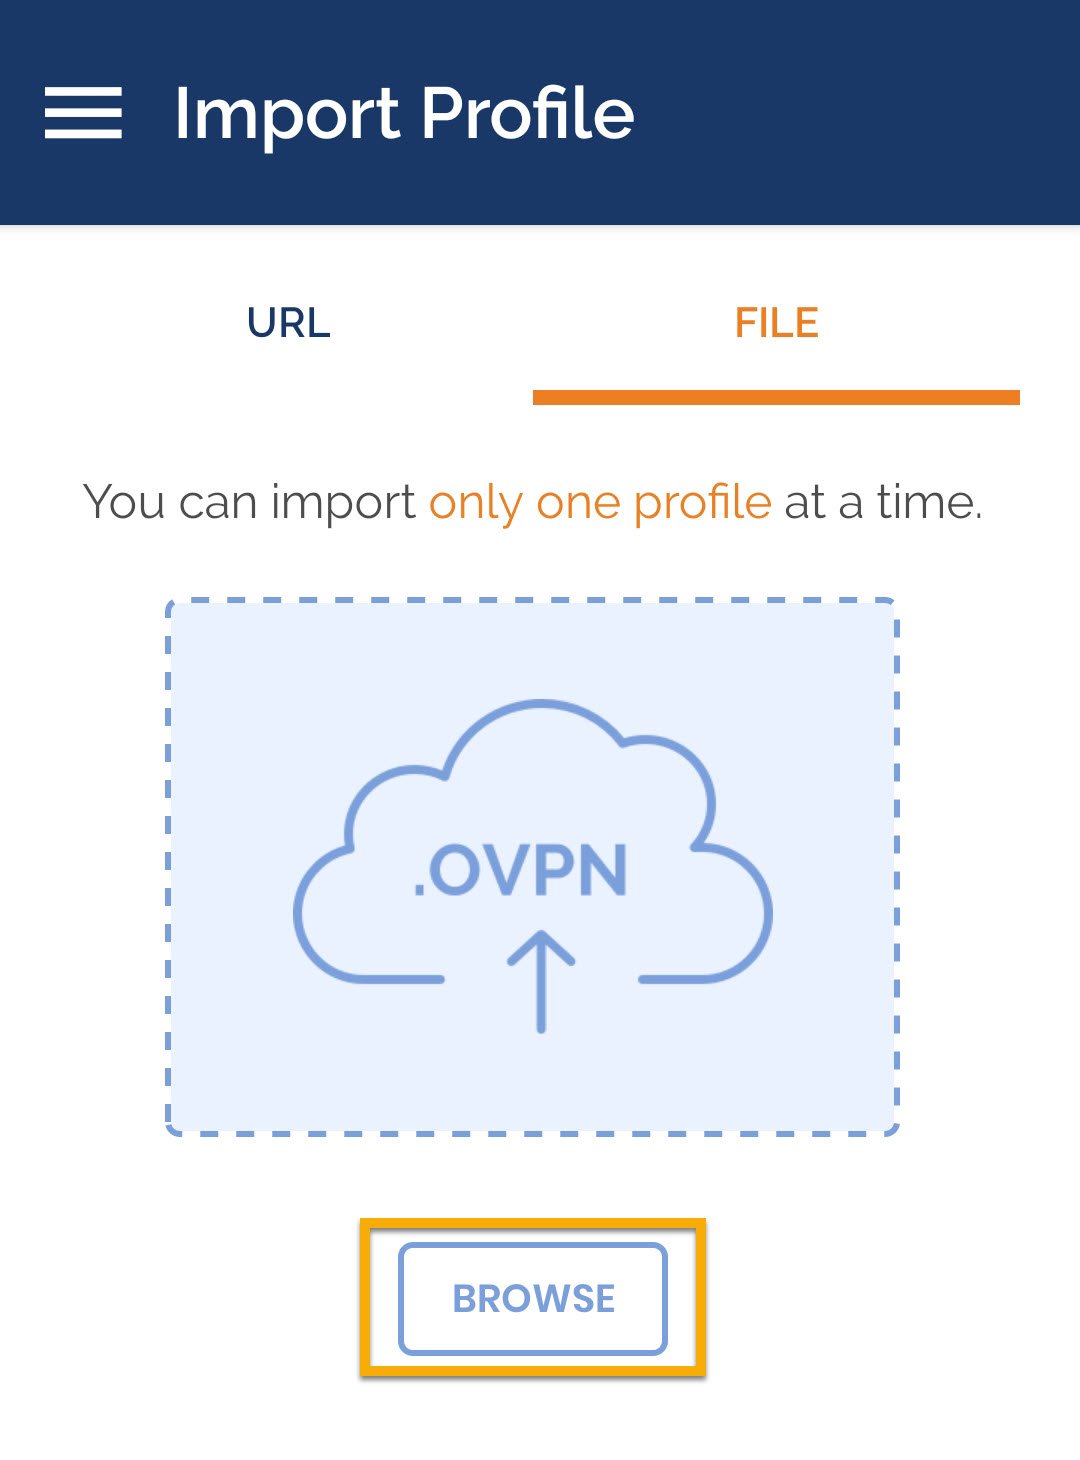 Importing the .ovpn file to the OpenVPN Connect client